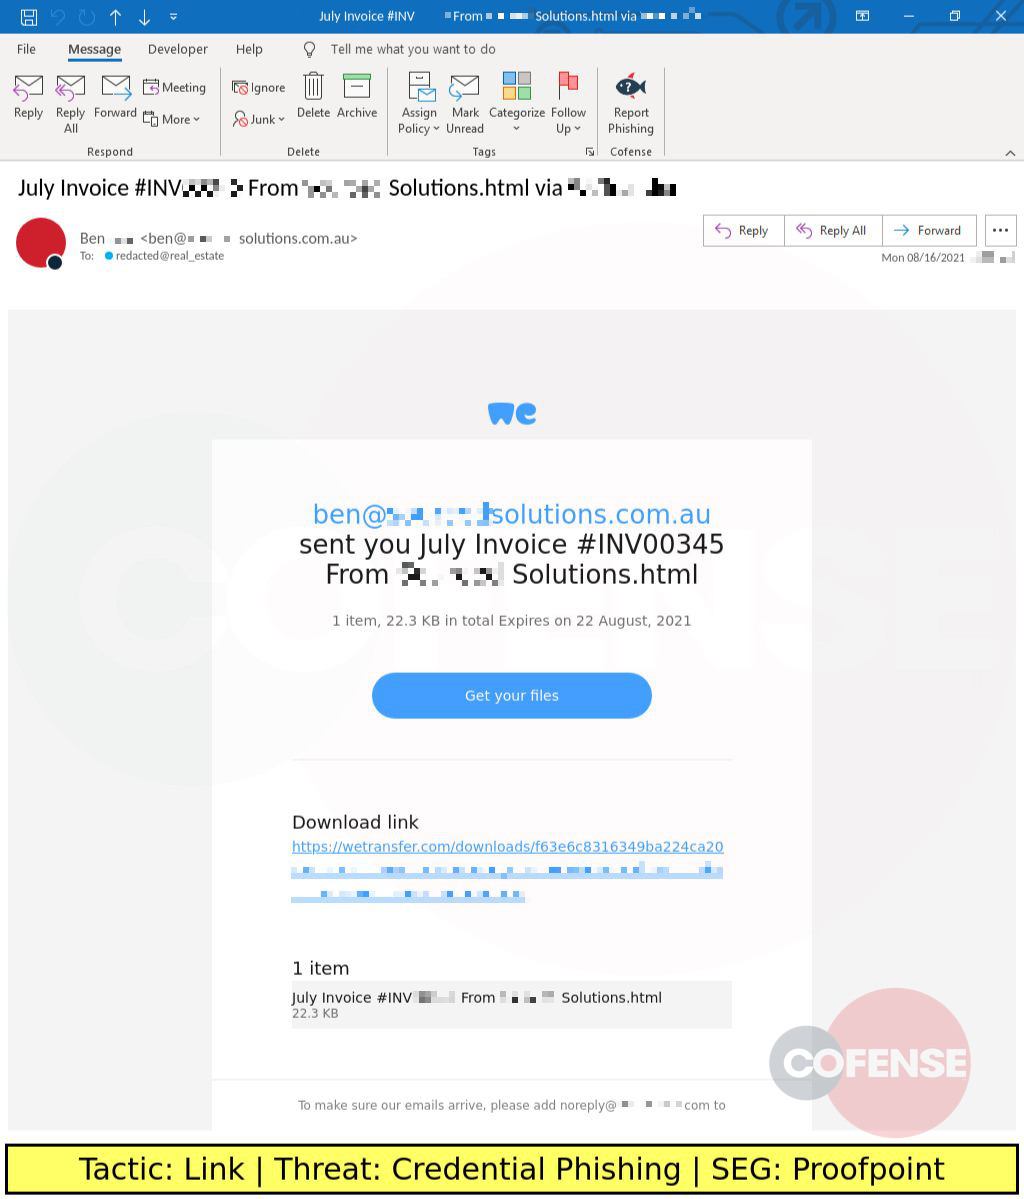 Real Phishing Example: WeTransfer-spoofing emails found in environments protected by Proofpoint deliver an HTML file via an embedded link. The HTML file contains embedded credential phishing content.